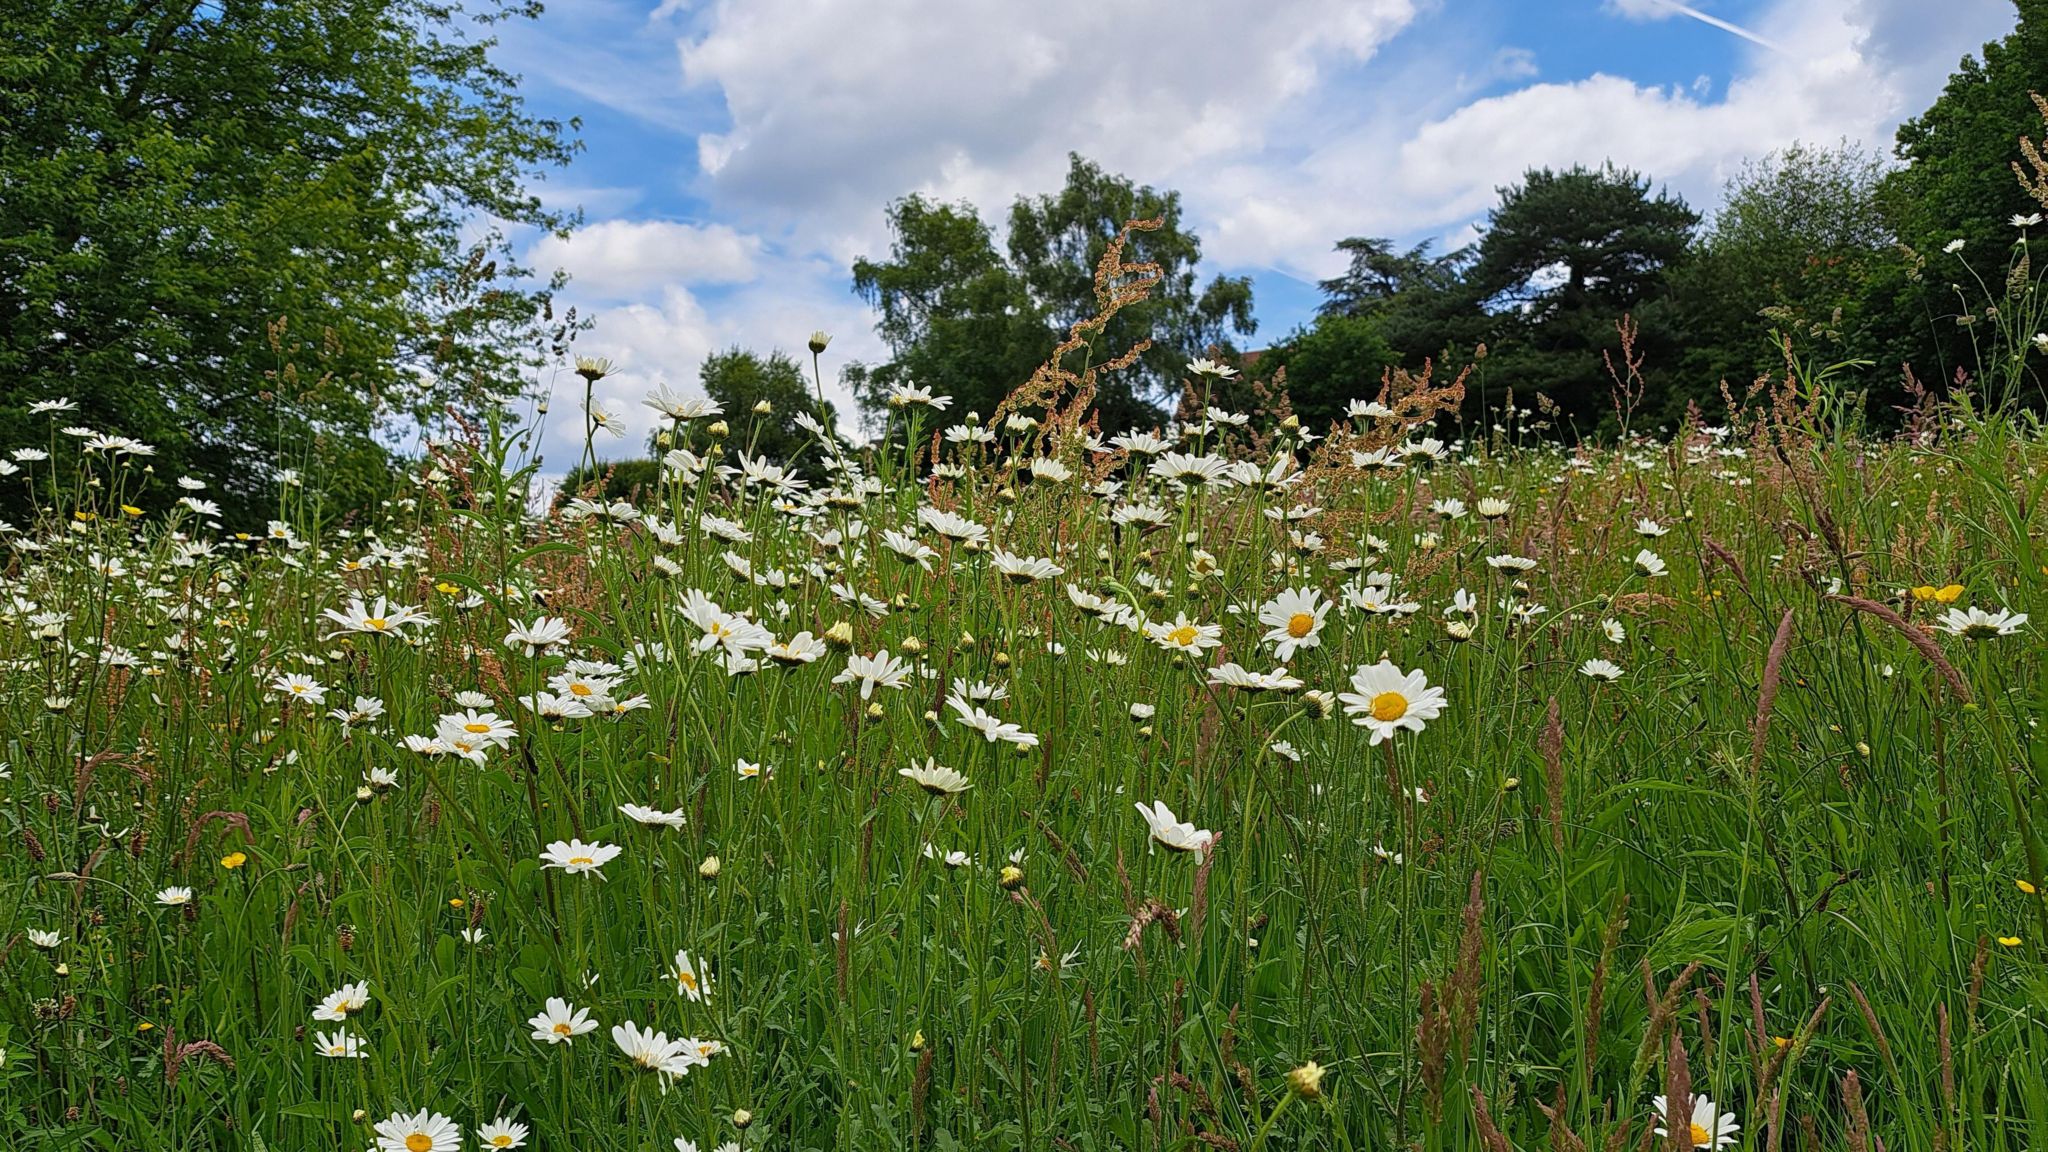 SUNDAY - a low shot of a field of daisies